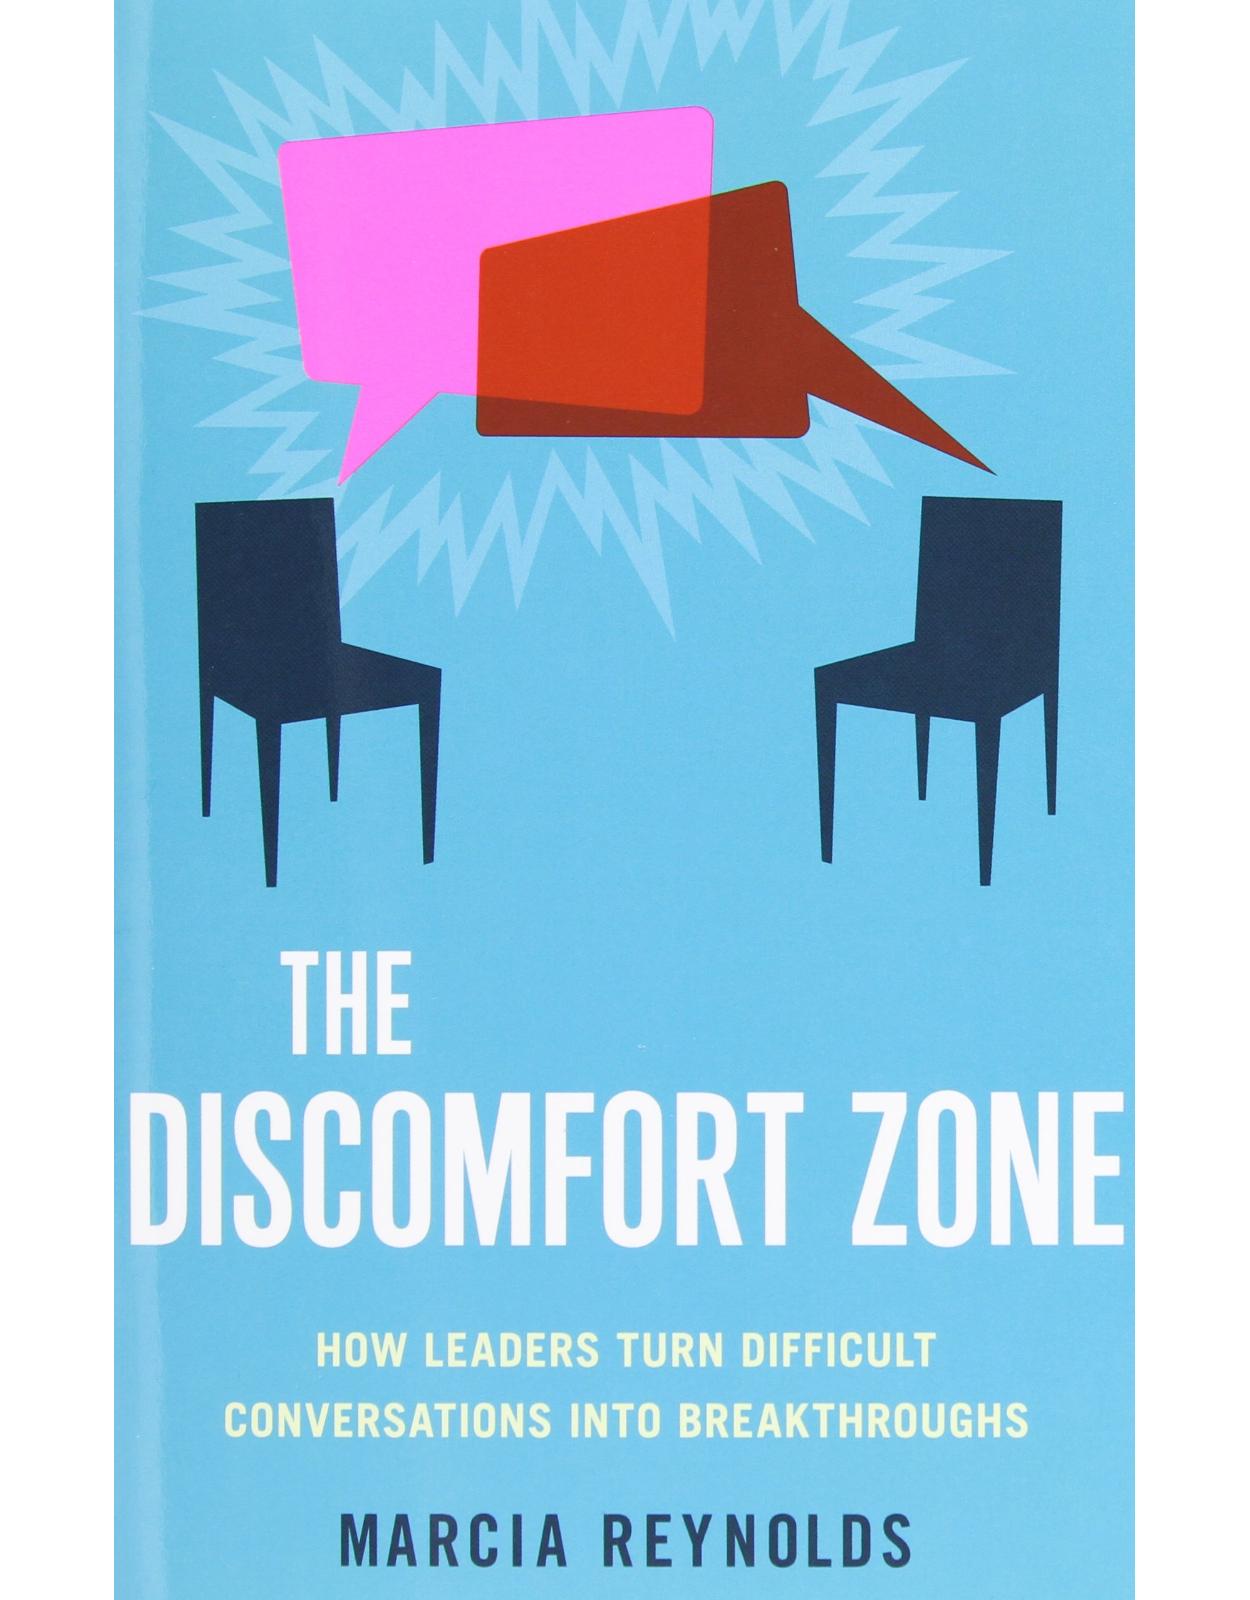 The Discomfort Zone: How Leaders Turn Difficult Conversations Into Breakthroughs (BK Business)